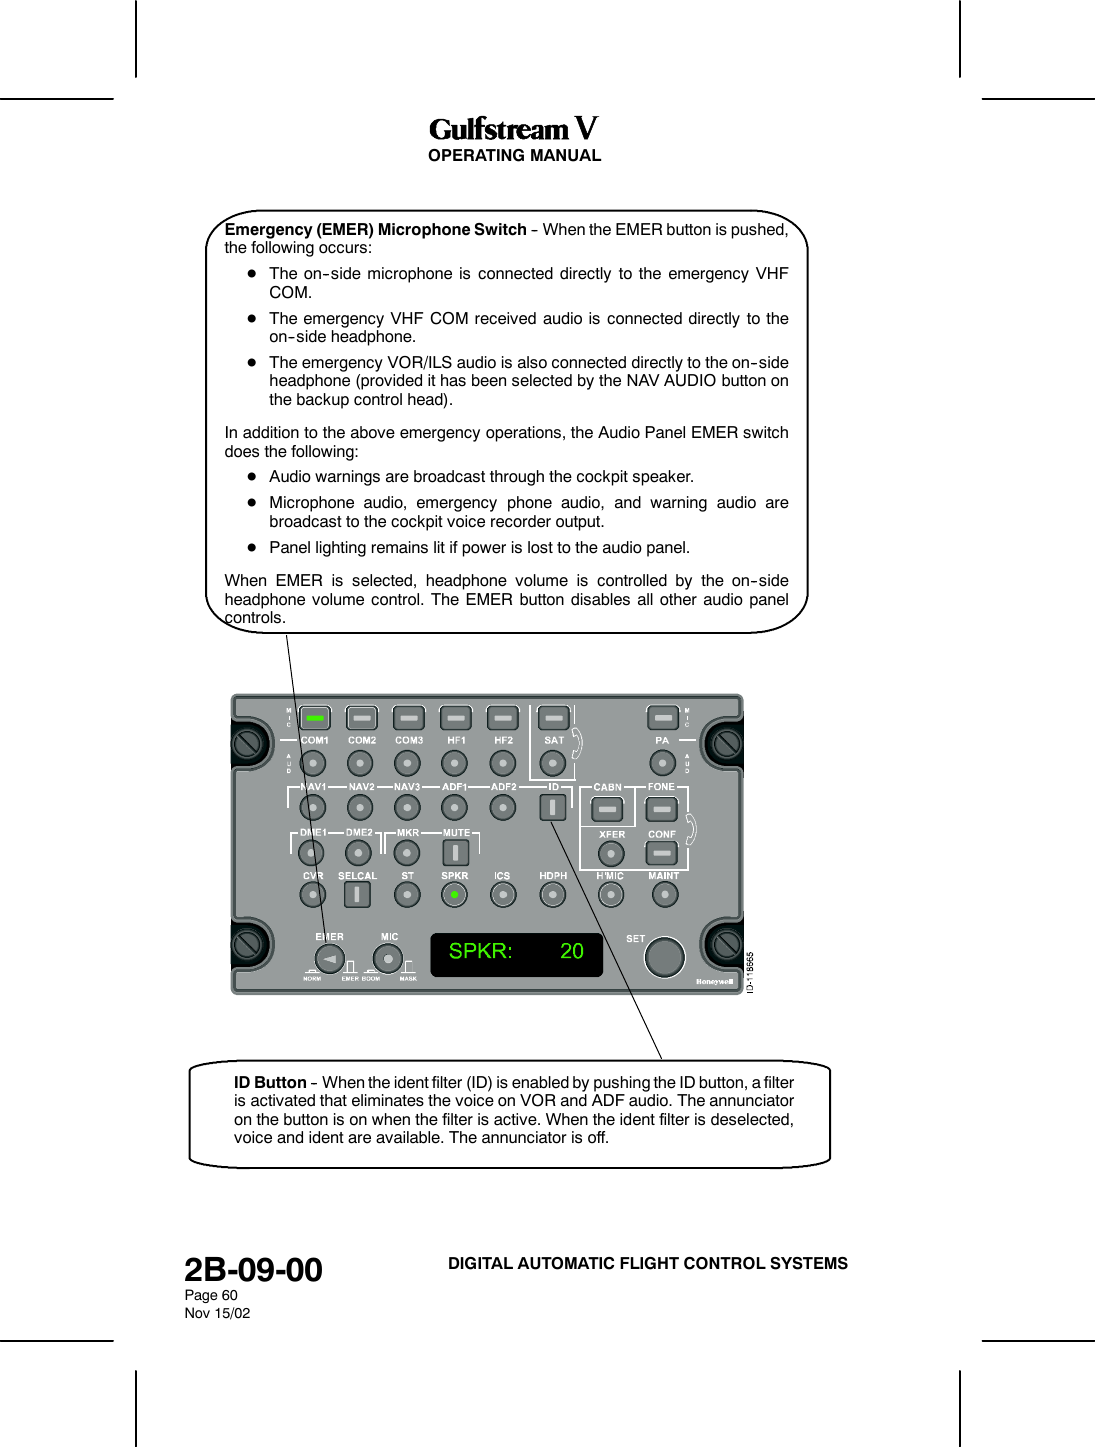 OPERATING MANUAL2B-09-00Page 60Nov 15/02DIGITAL AUTOMATIC FLIGHT CONTROL SYSTEMSEmergency (EMER) Microphone Switch -- When the EMER button is pushed,the following occurs:DThe on--side microphone is connected directly to the emergency VHFCOM.DThe emergency VHF COM received audio is connected directly to theon--side headphone.DThe emergency VOR/ILS audio is also connected directly to the on--sideheadphone (provided it has been selected by the NAV AUDIO button onthe backup control head).In addition to the above emergency operations, the Audio Panel EMER switchdoes the following:DAudio warnings are broadcast through the cockpit speaker.DMicrophone audio, emergency phone audio, and warning audio arebroadcast to the cockpit voice recorder output.DPanel lighting remains lit if power is lost to the audio panel.When EMER is selected, headphone volume is controlled by the on--sideheadphone volume control. The EMER button disables all other audio panelcontrols.ID Button -- When the ident filter (ID) is enabled by pushing the ID button, a filteris activated that eliminates the voice on VOR and ADF audio. The annunciatoron the button is on when the filter is active. When the ident filter is deselected,voice and ident are available. The annunciator is off.